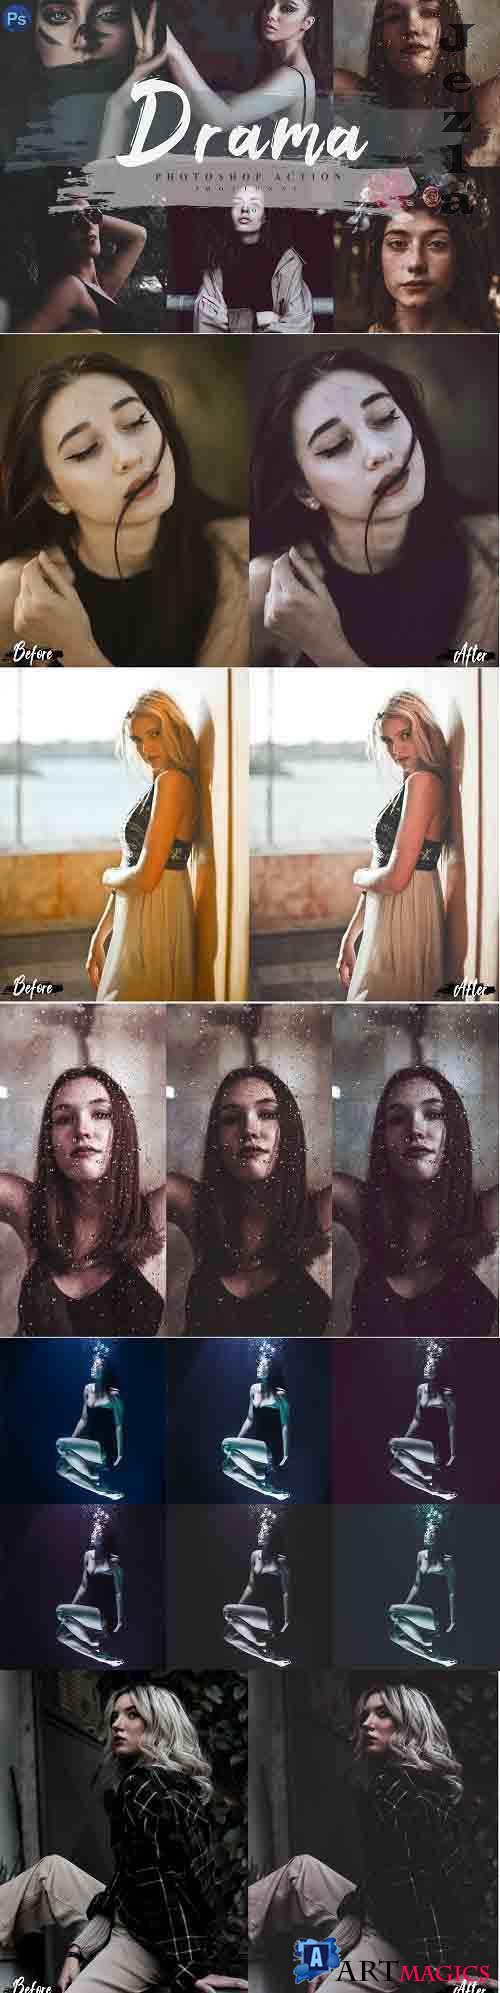 14 Drama Photoshop Actions, ACR and LUT Presets  - 761173